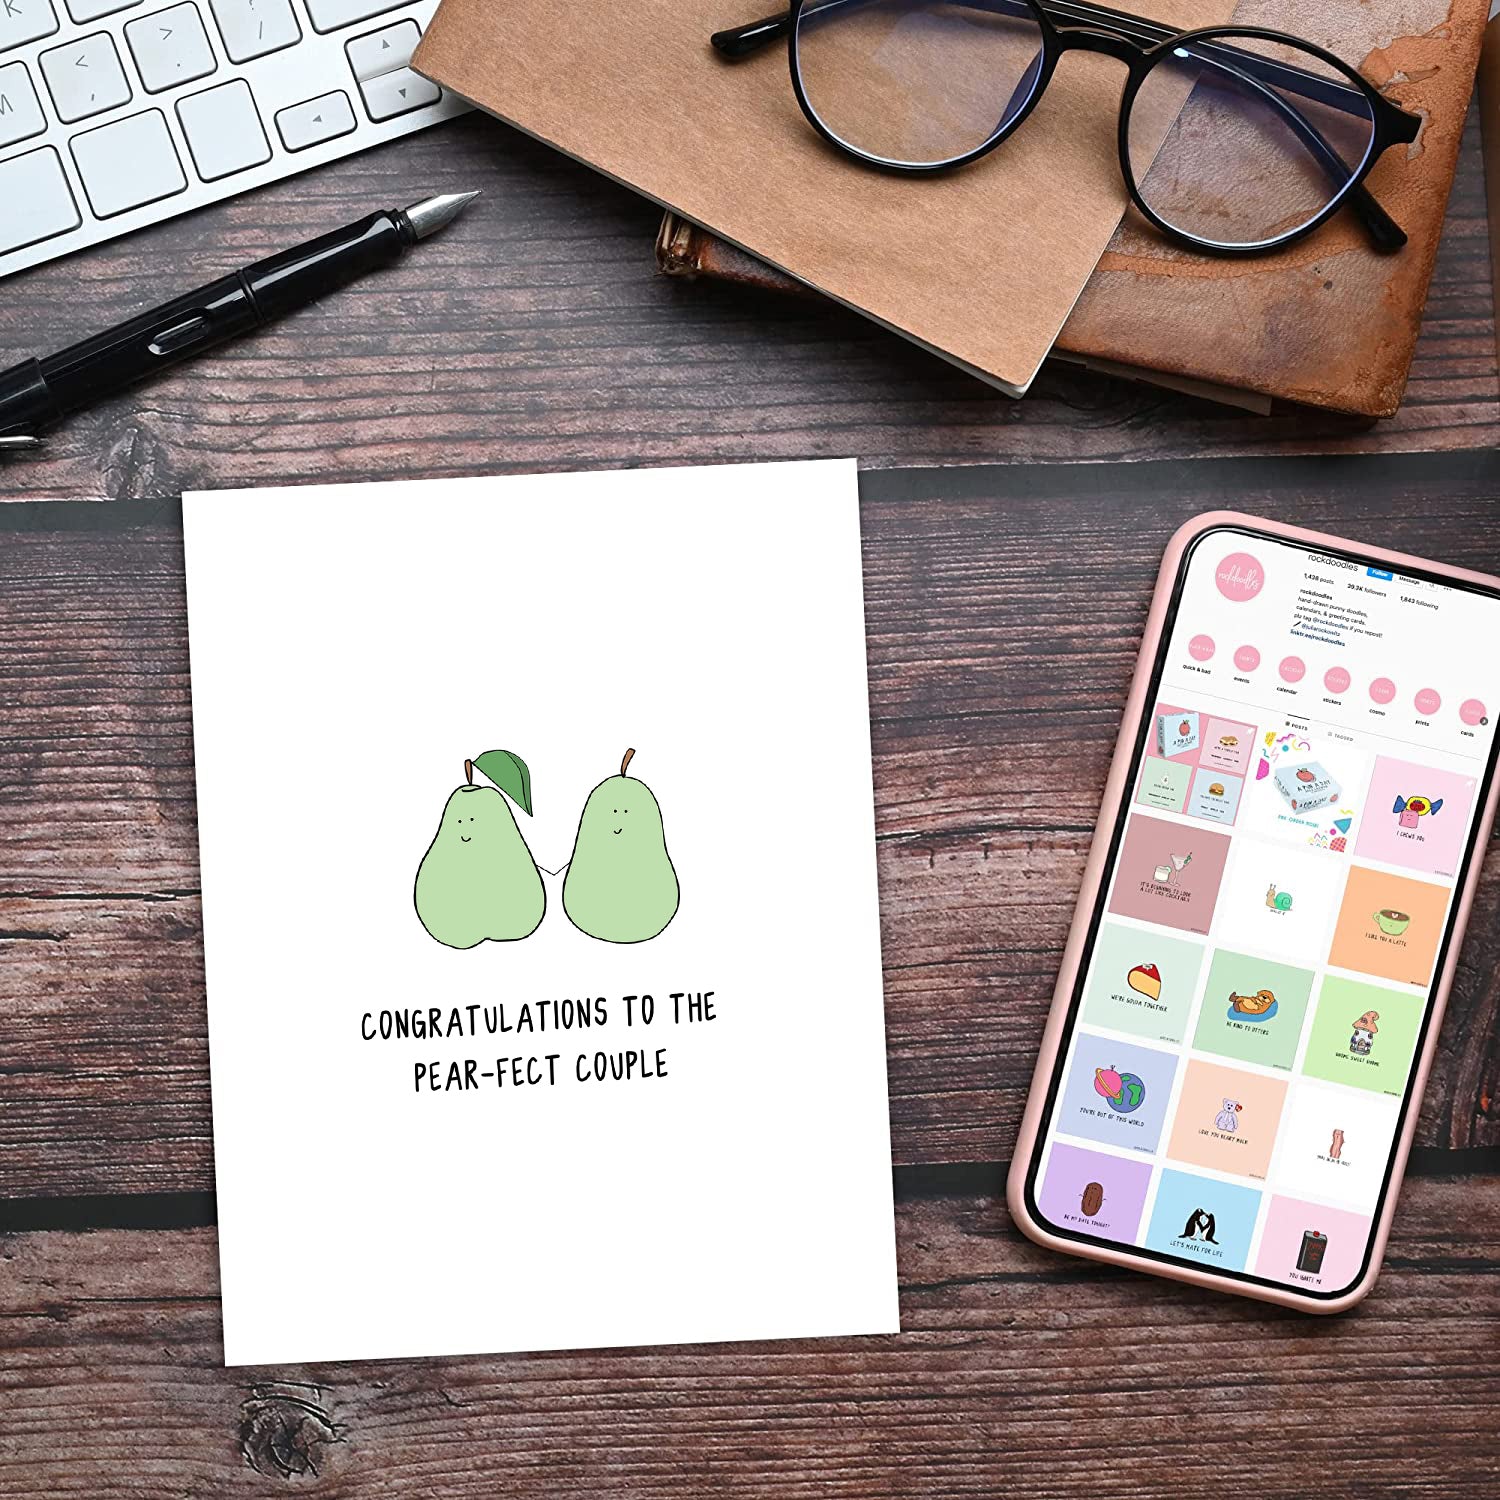 Congratulations on finding your rockdoodles Pear-Fect Couple Card! This unique card showcases two delightful pears alongside a cute phone illustration. It's the perfect way to celebrate and spread joy for any special occasion.